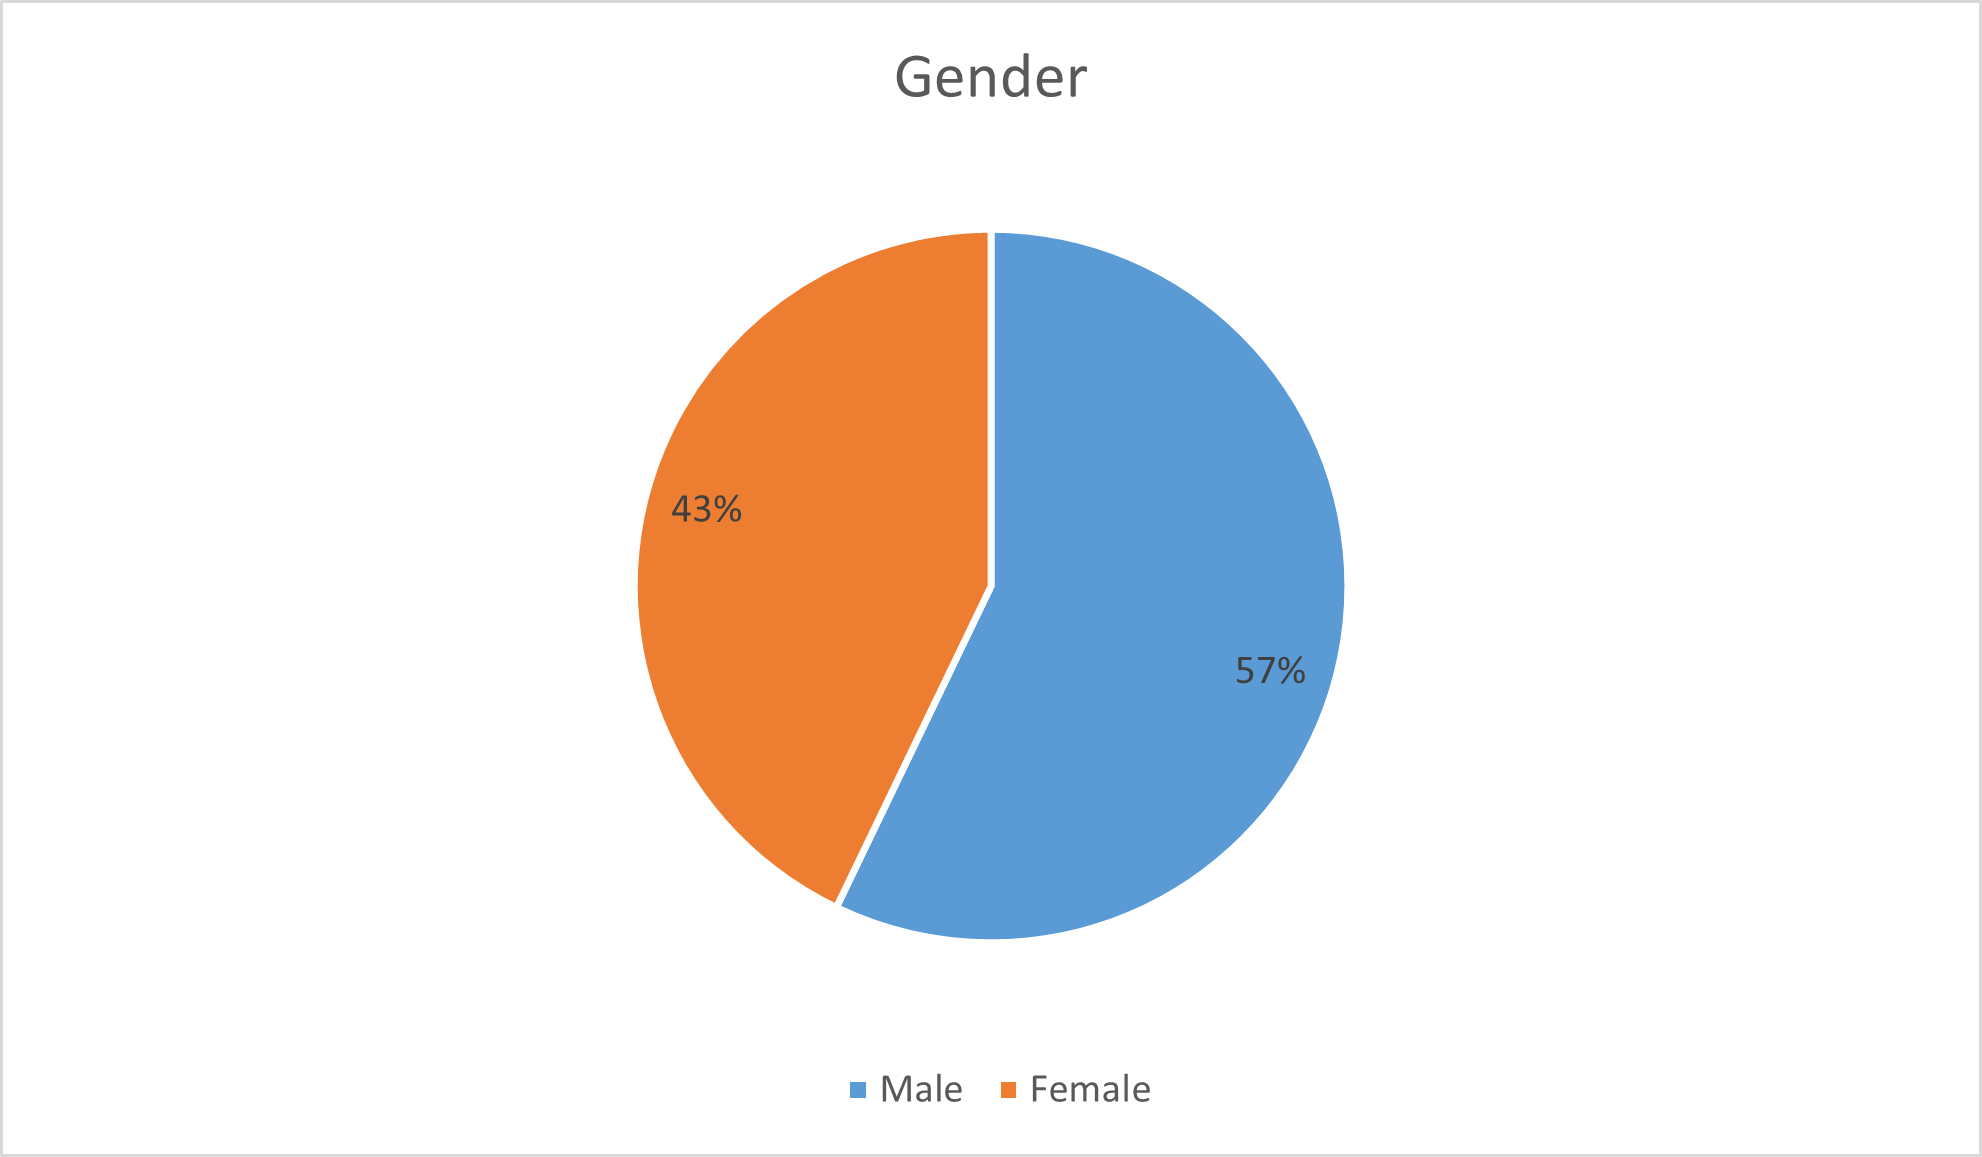 Gender of the respondents